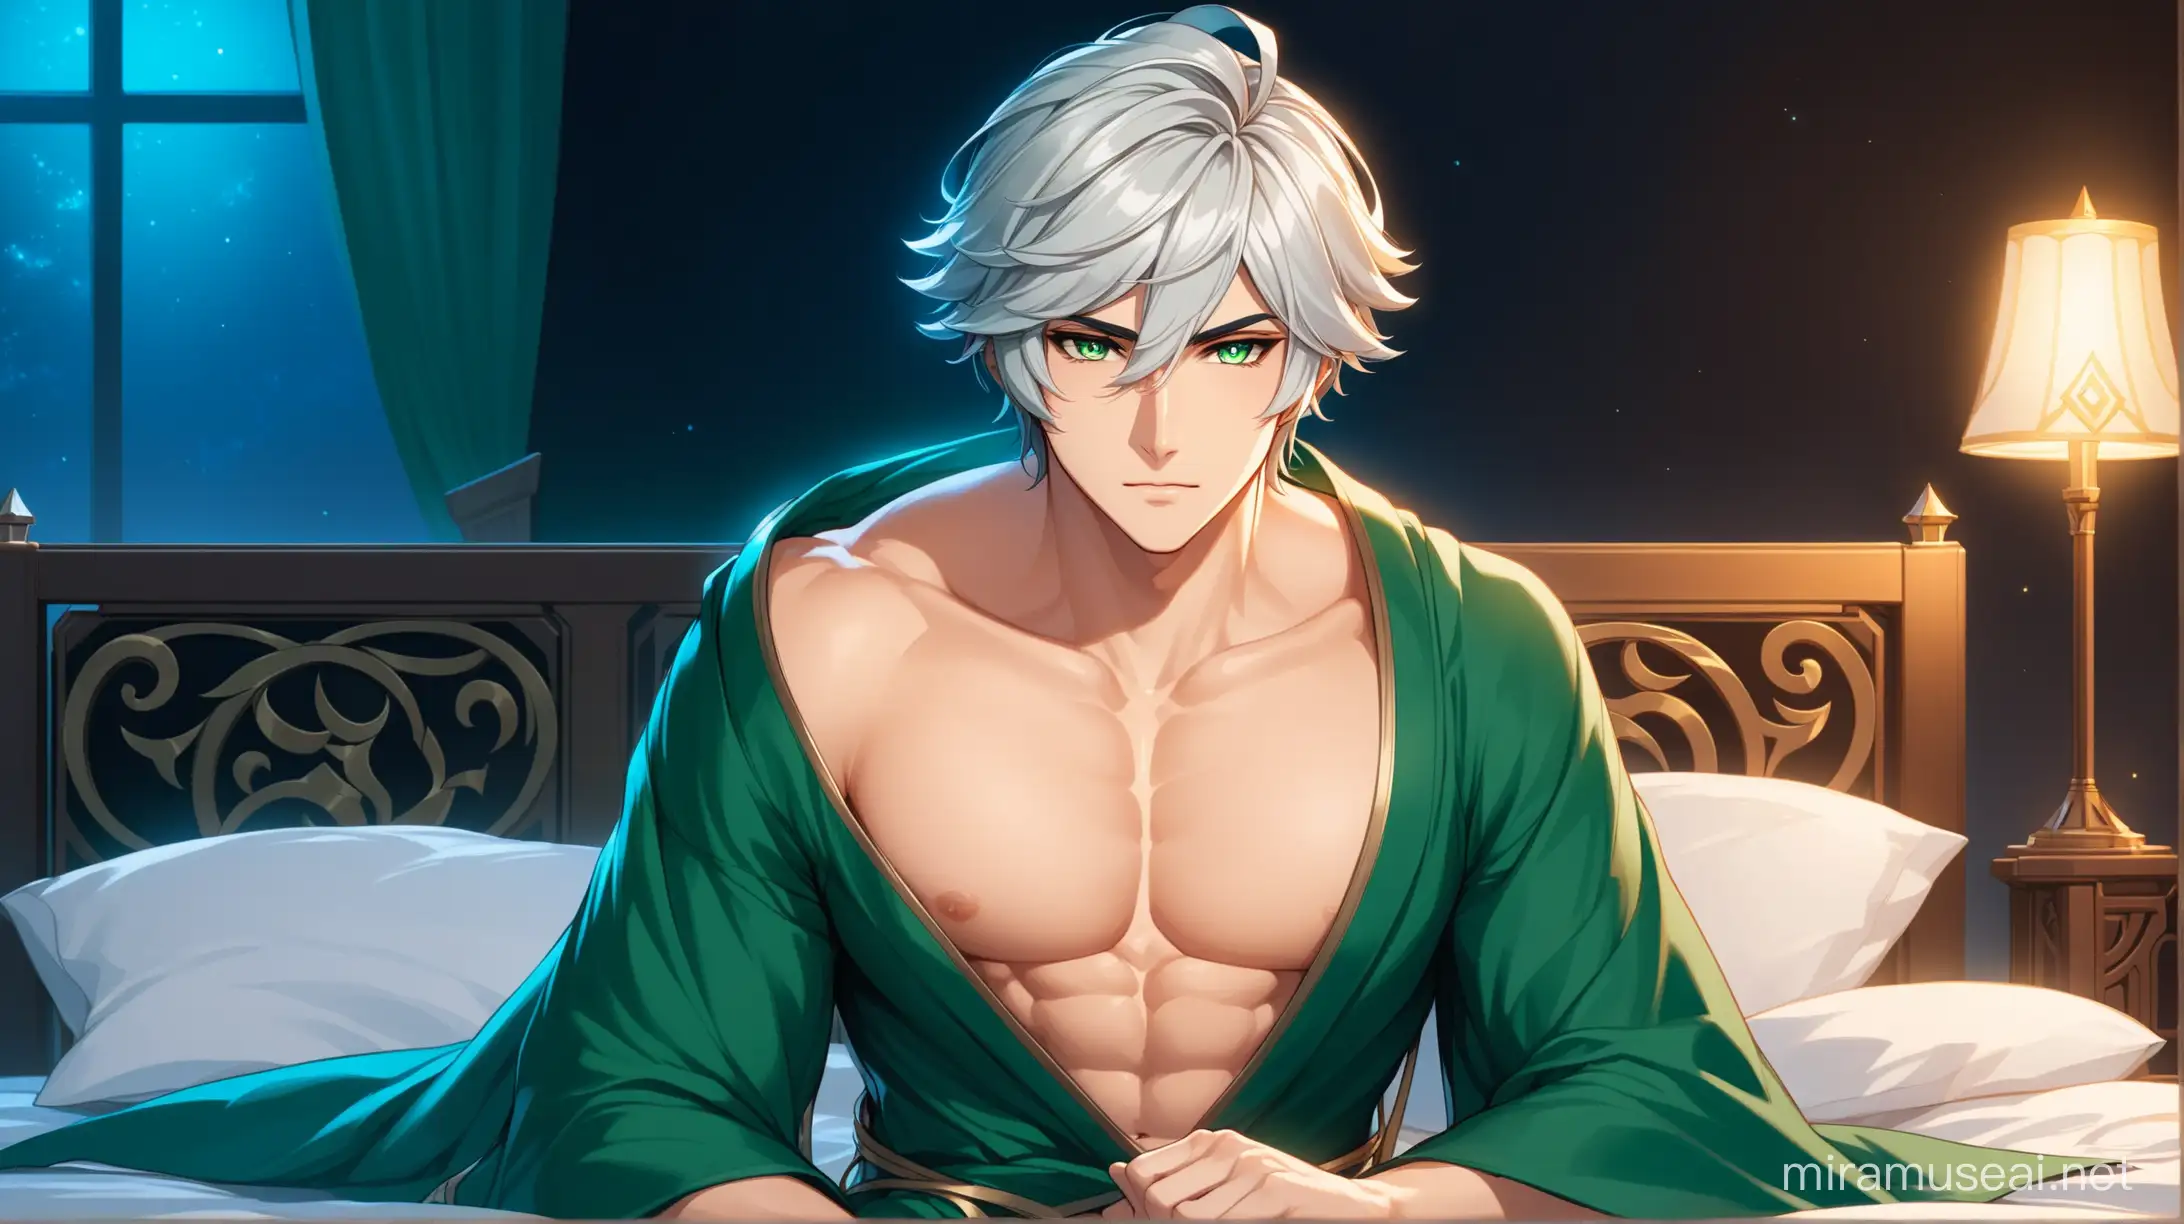 Draw the character Alhaitham (from Genshin Impact), with silver hair and green eyes, lying on a bed, indoors, at night, in a nonchalant pose, she is wearing a loose robe, with an exposed chest and abs, looking seductively at the viewer